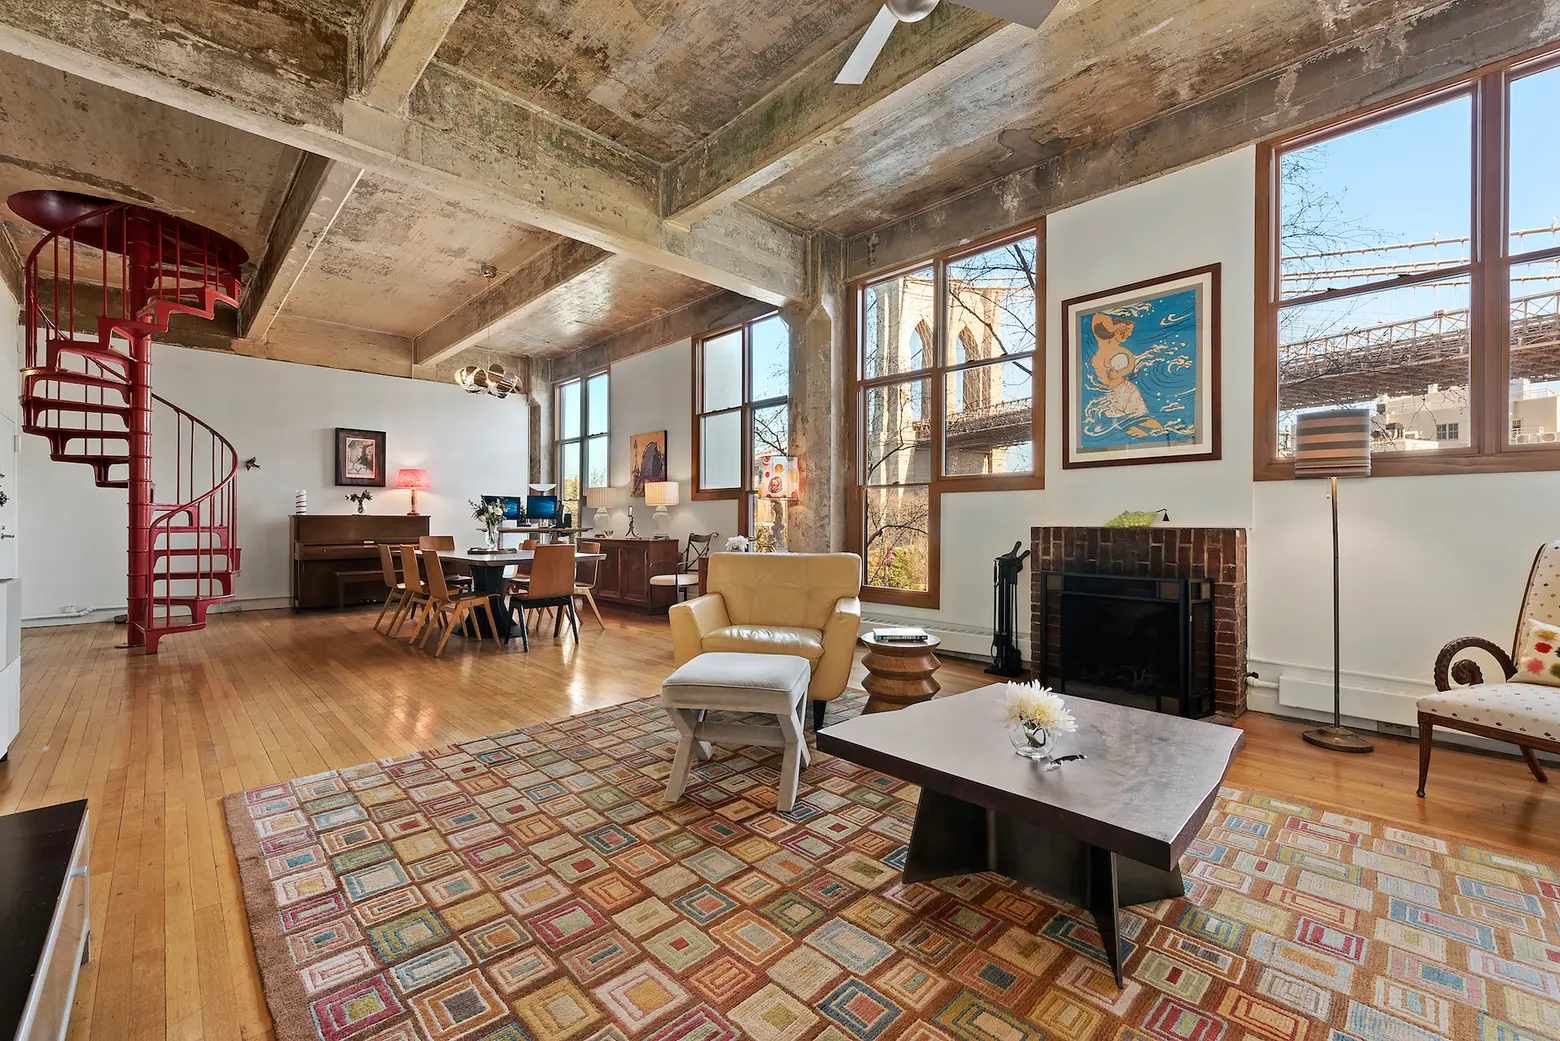 Brooklyn Heights carriage house loft has a private roof deck and Brooklyn Bridge views for $2.2M